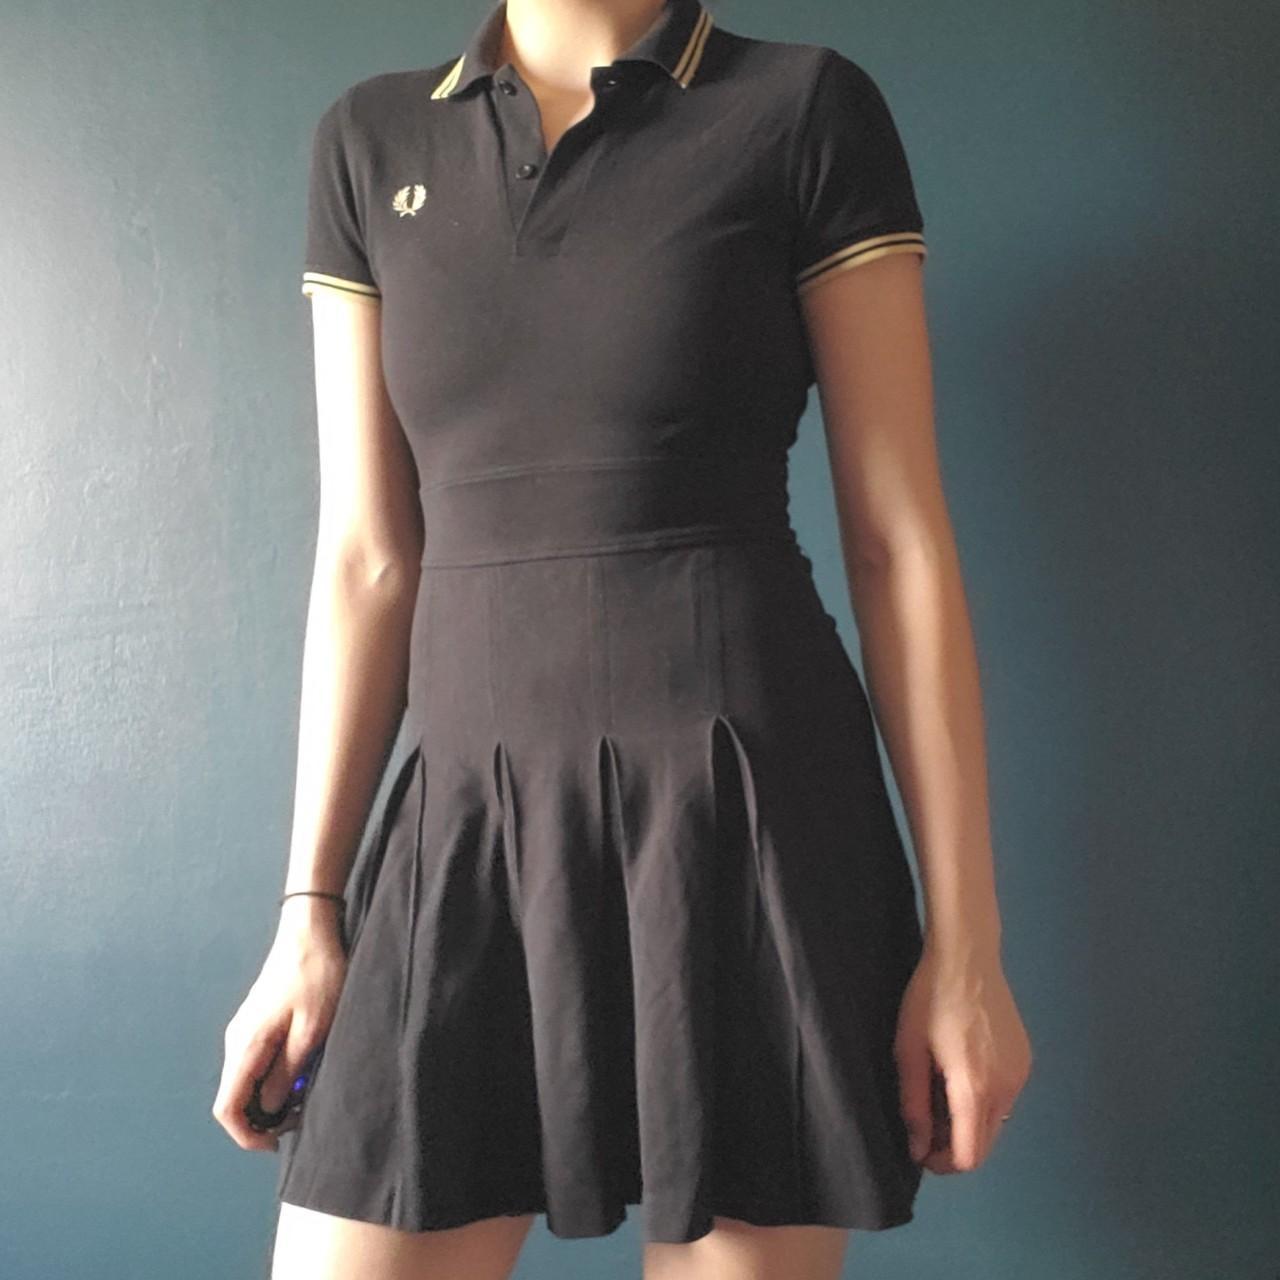 Fred Perry Tennis Dress Black and gold Size 6... - Depop